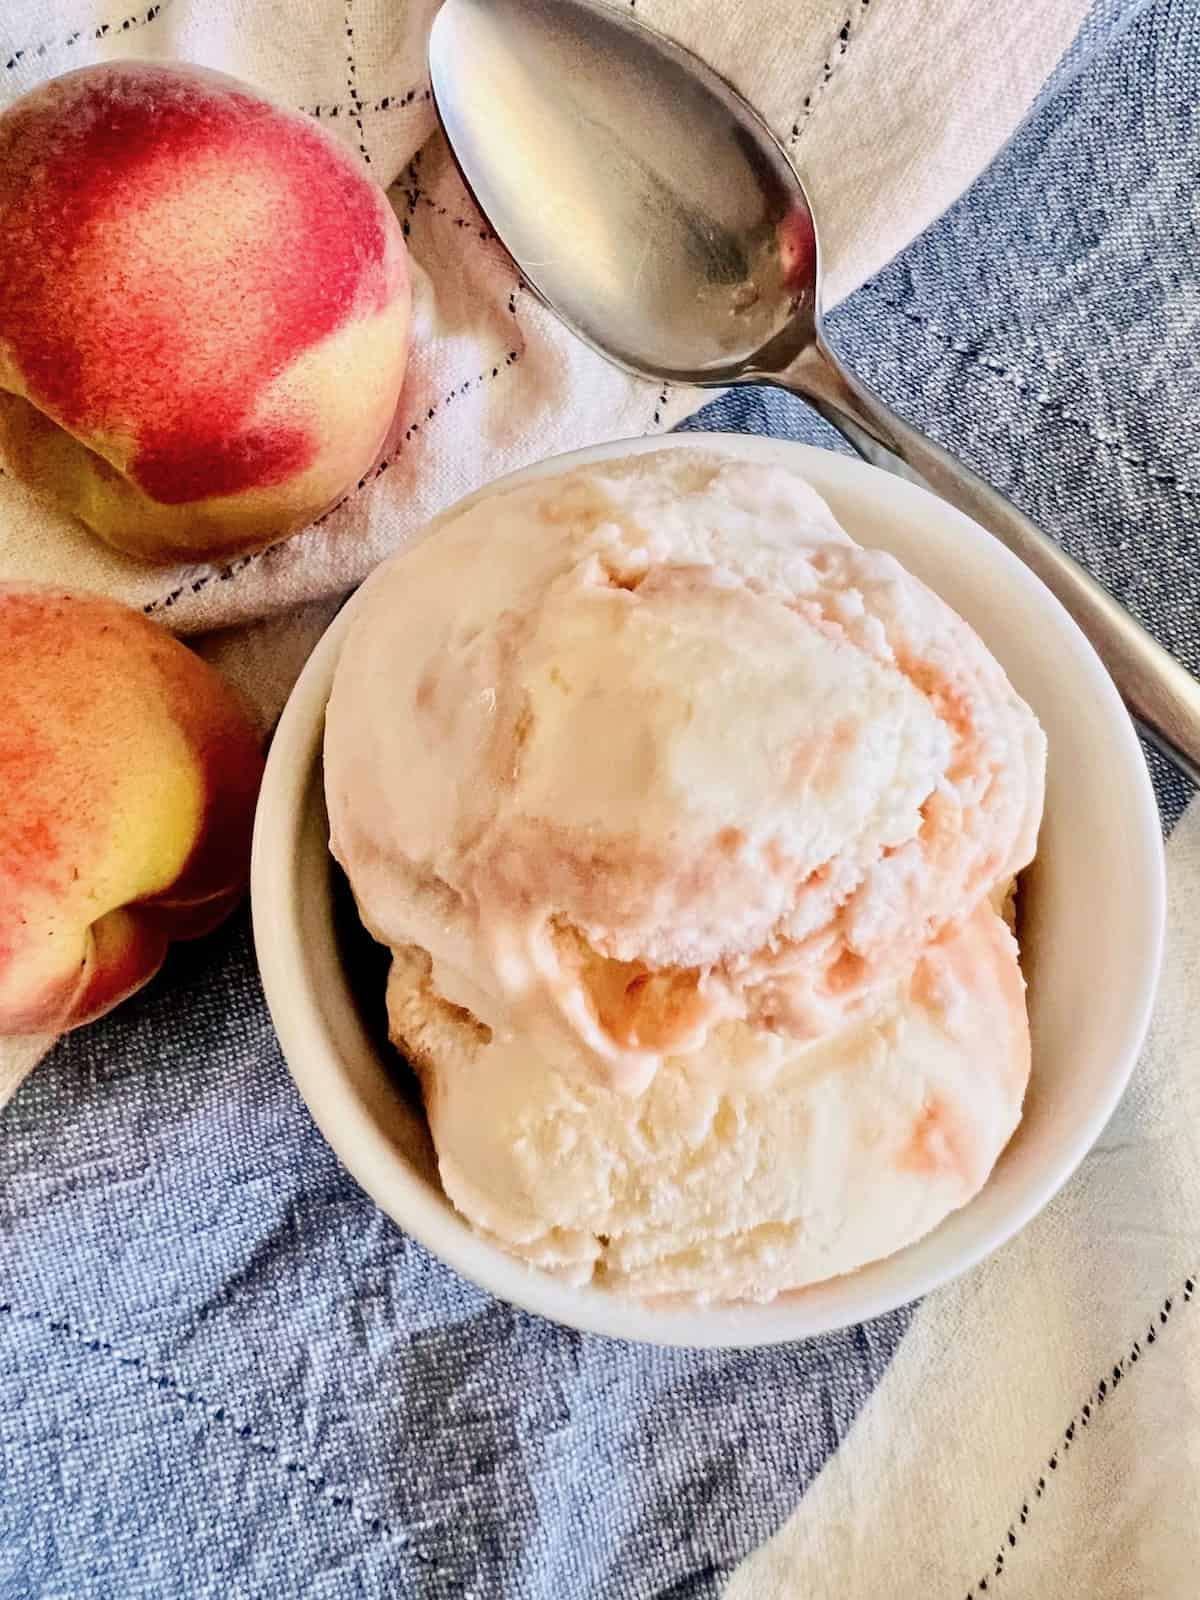 Peaches & Cream Ice Cream A scoop in a white ramekin next to a spoon and peaches on top of a cloth napkin.